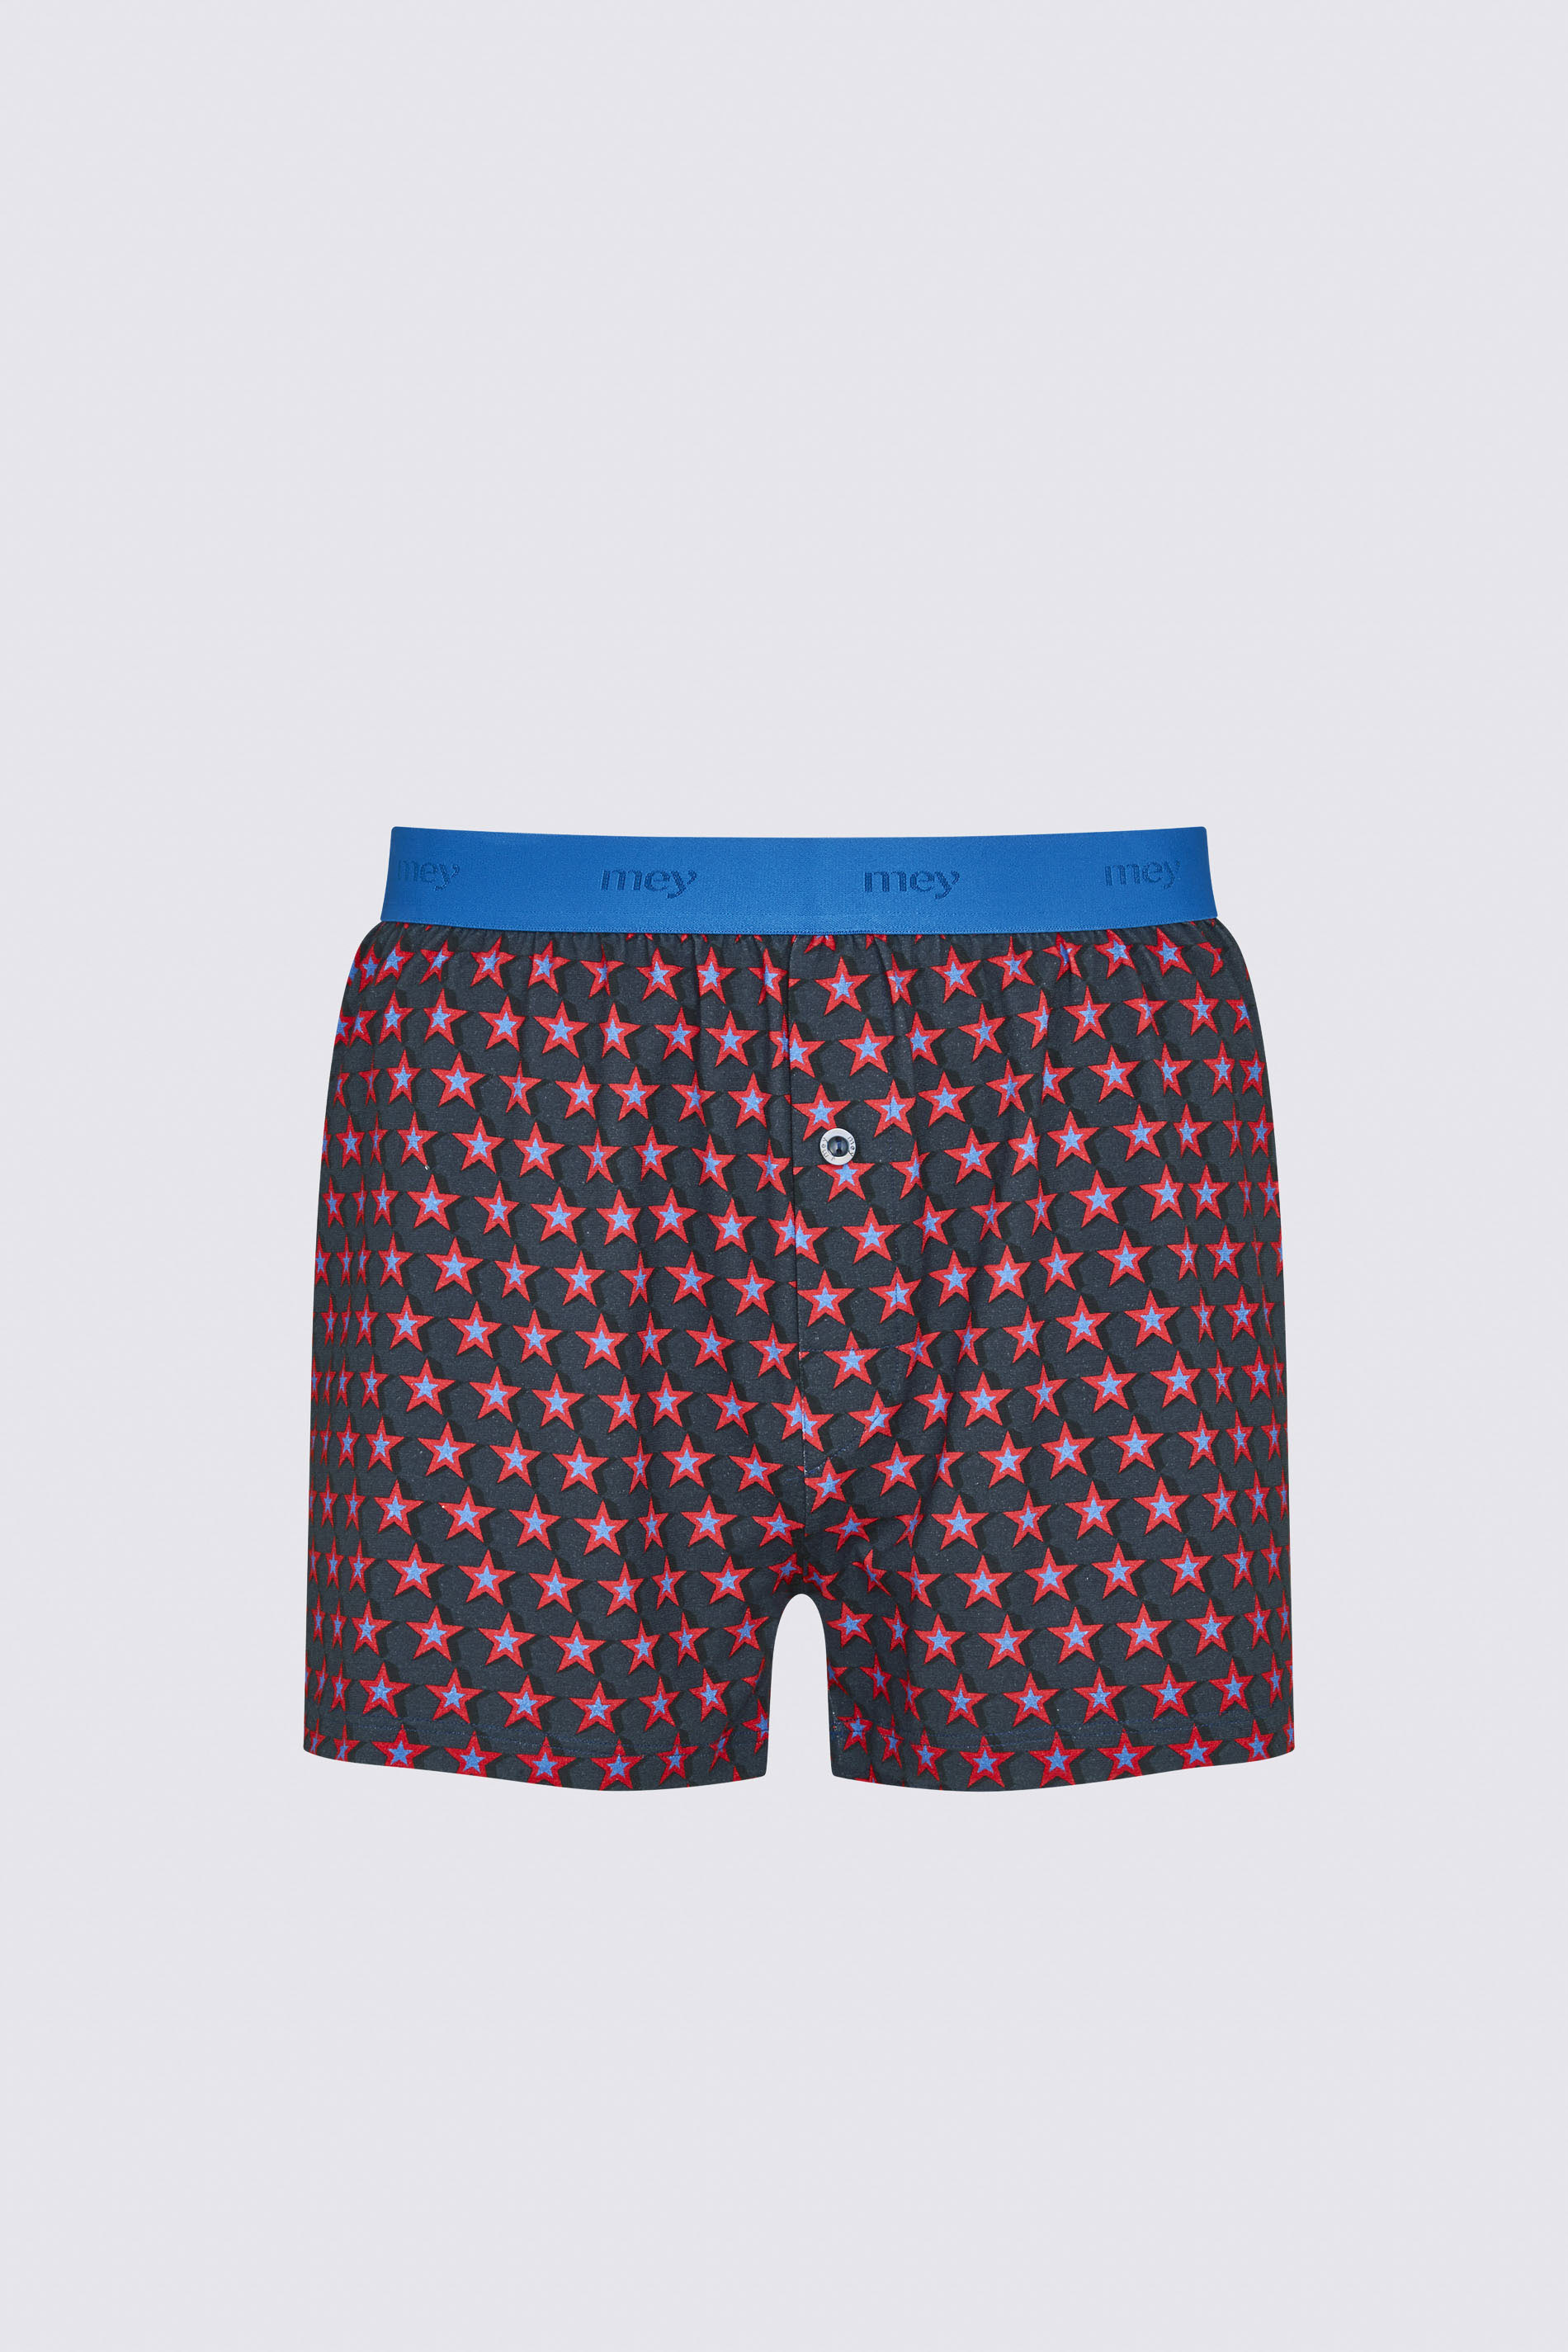 Boxershorts Fire Red Serie RE:THINK STAR Uitknippen | mey®